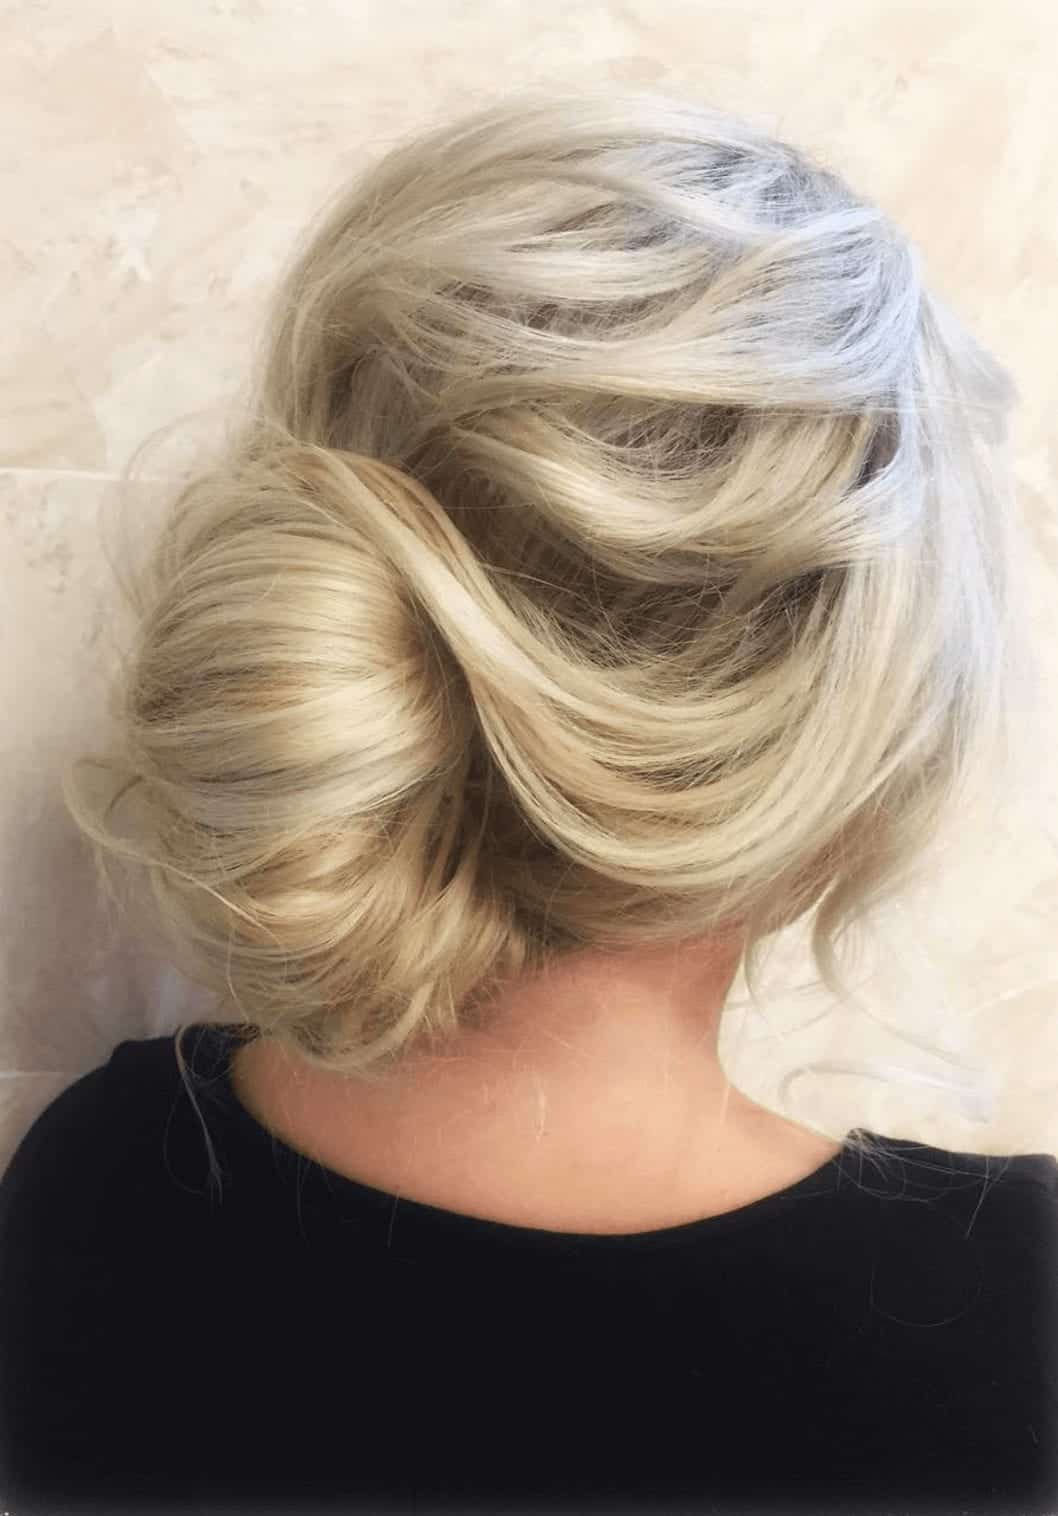 10 Pictures That Prove The Banana Bun Will Be Your New Favorite Hairstyle